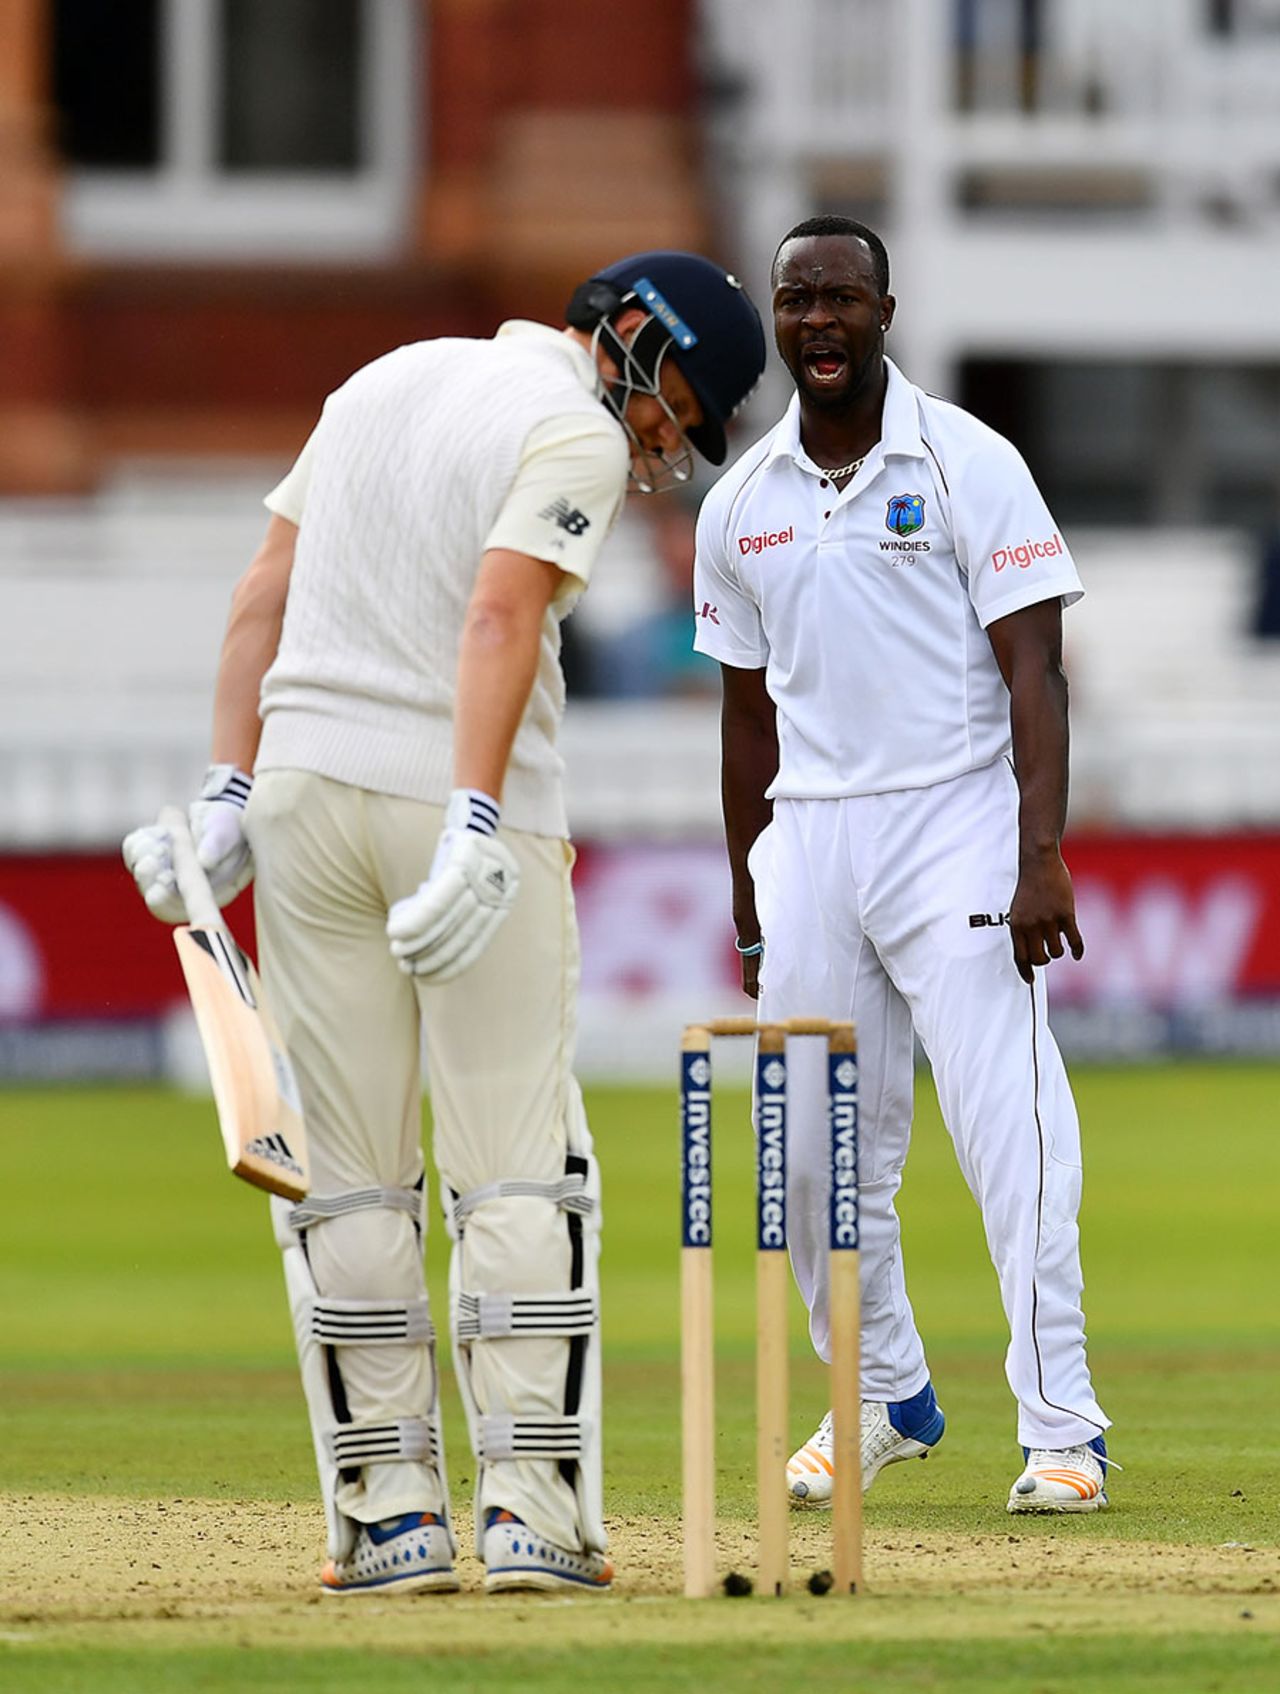 Kemar Roach ended a difficult stay for Jonny Bairstow, England v West Indies, 3rd Investec Test, Lord's, 2nd day, September 8, 2017 